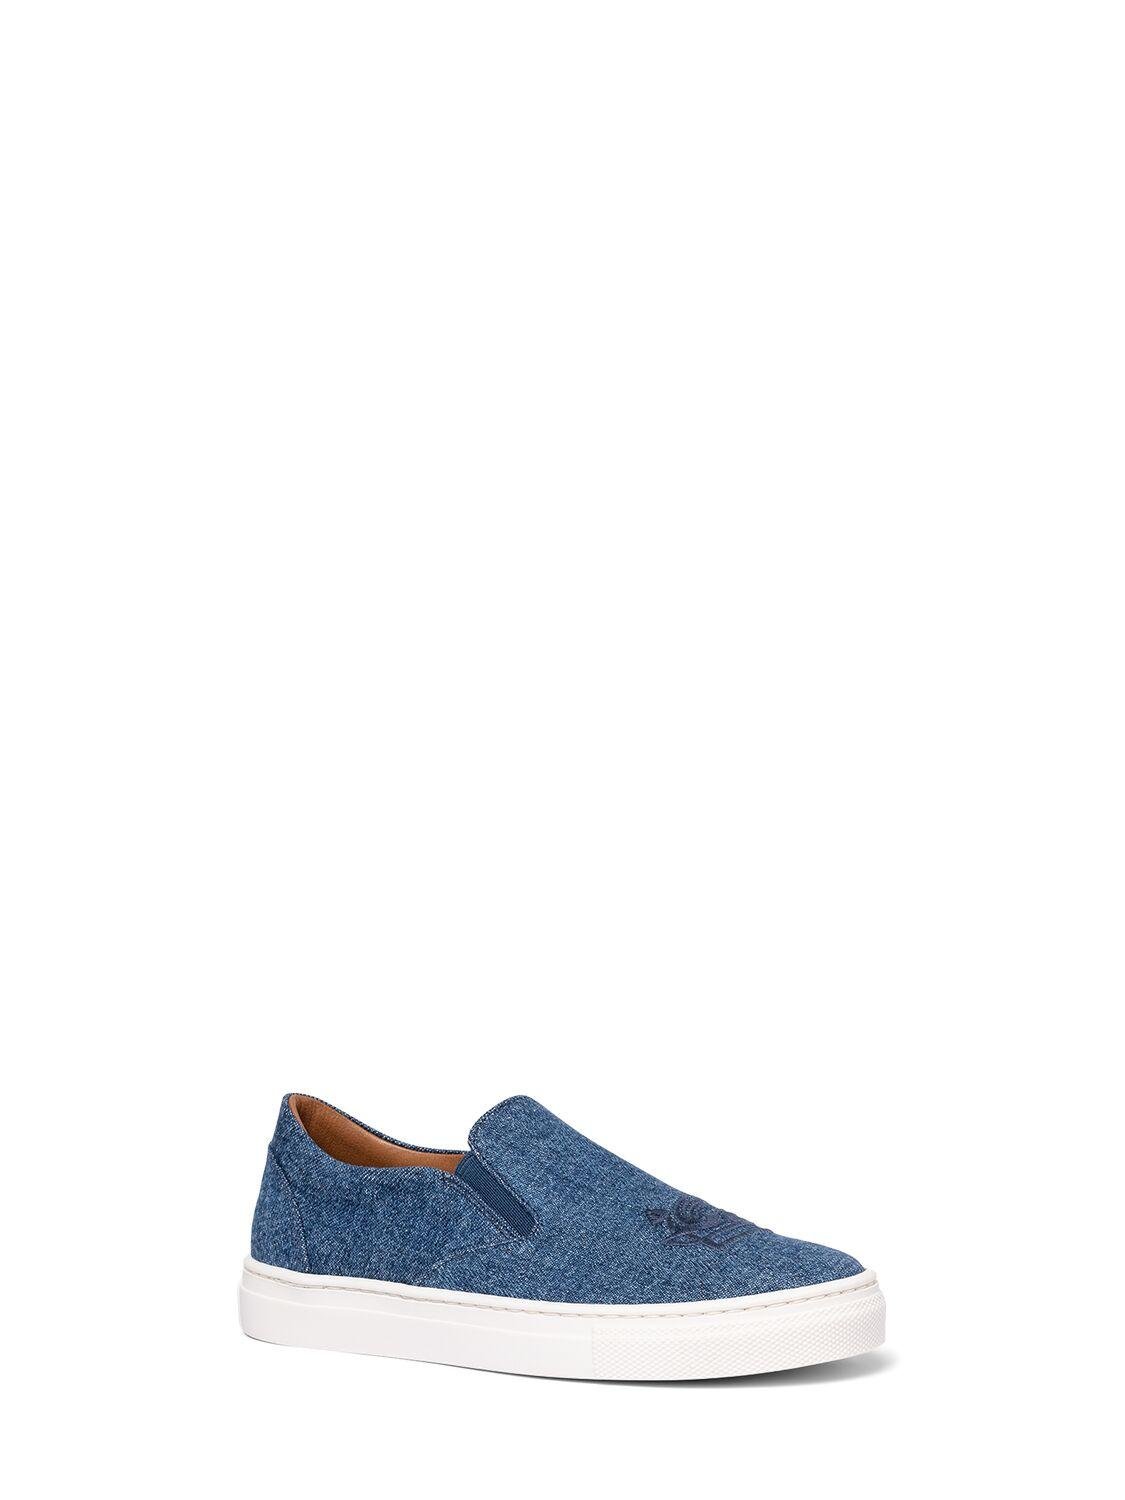 Embroidered Logo Denim Slip-on Shoes by ETRO